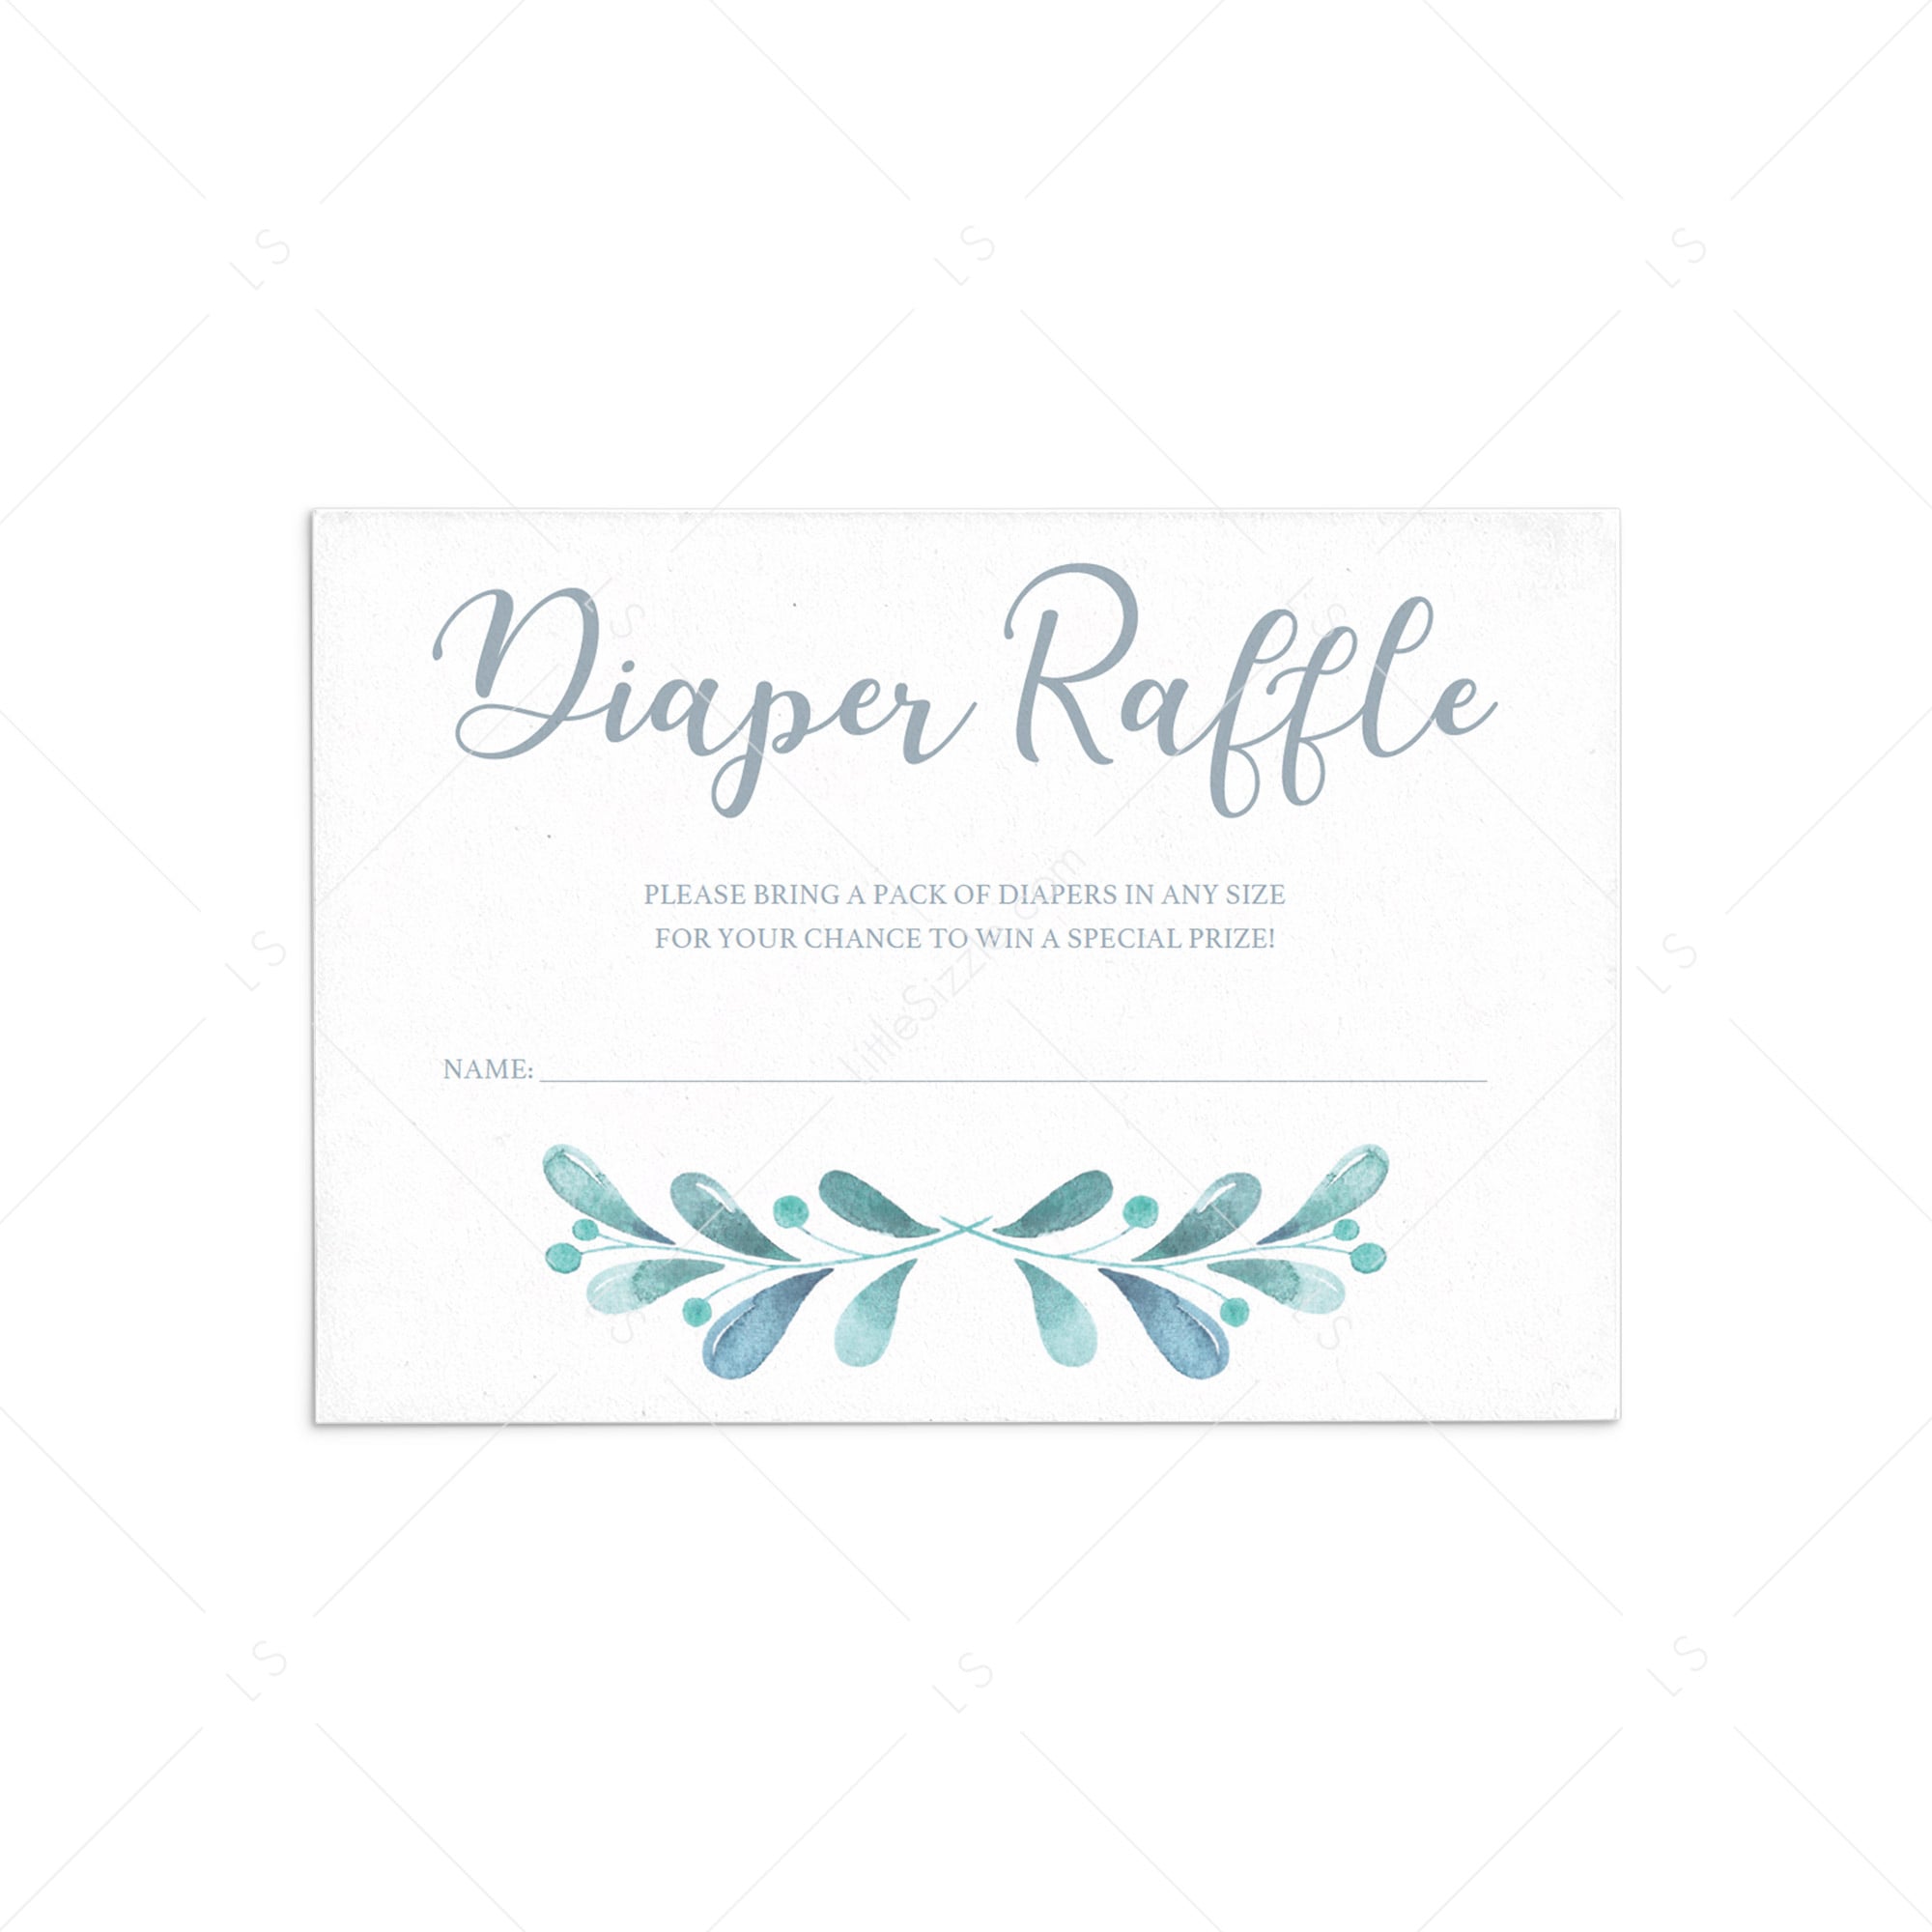 Printable diaper raffle game for winter baby party by LittleSizzle